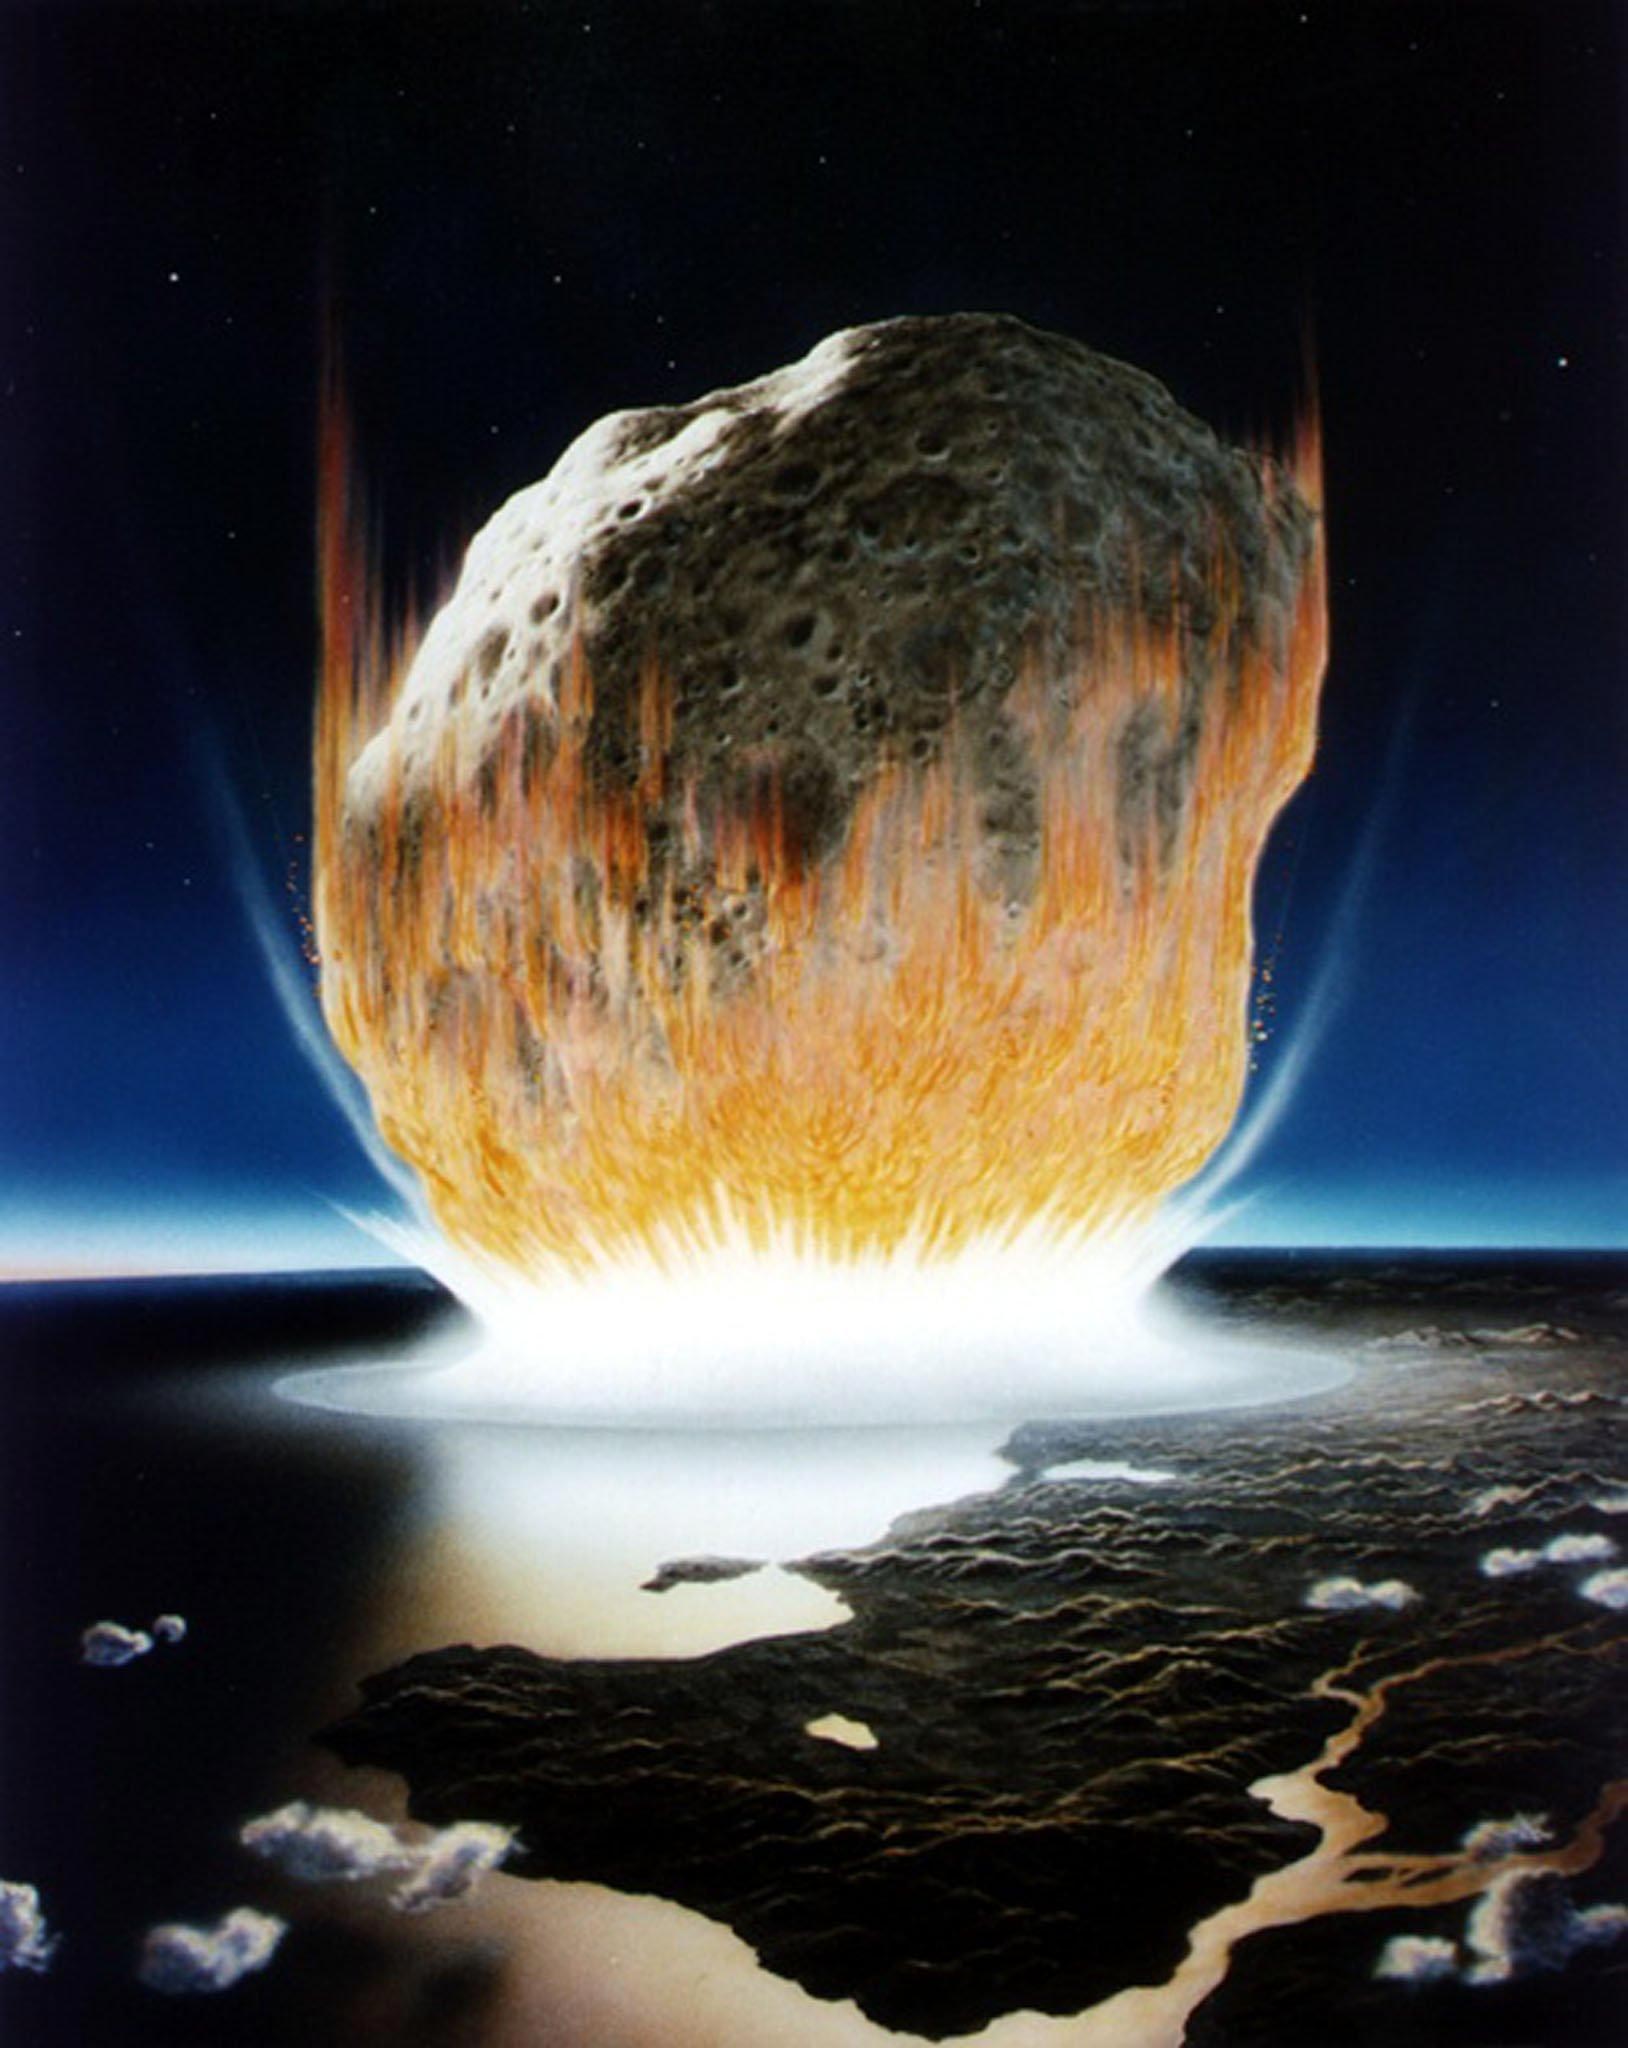 First Day of Dinosaur Extinction Recorded by Rocks at Asteroid Impact Site1628 x 2048